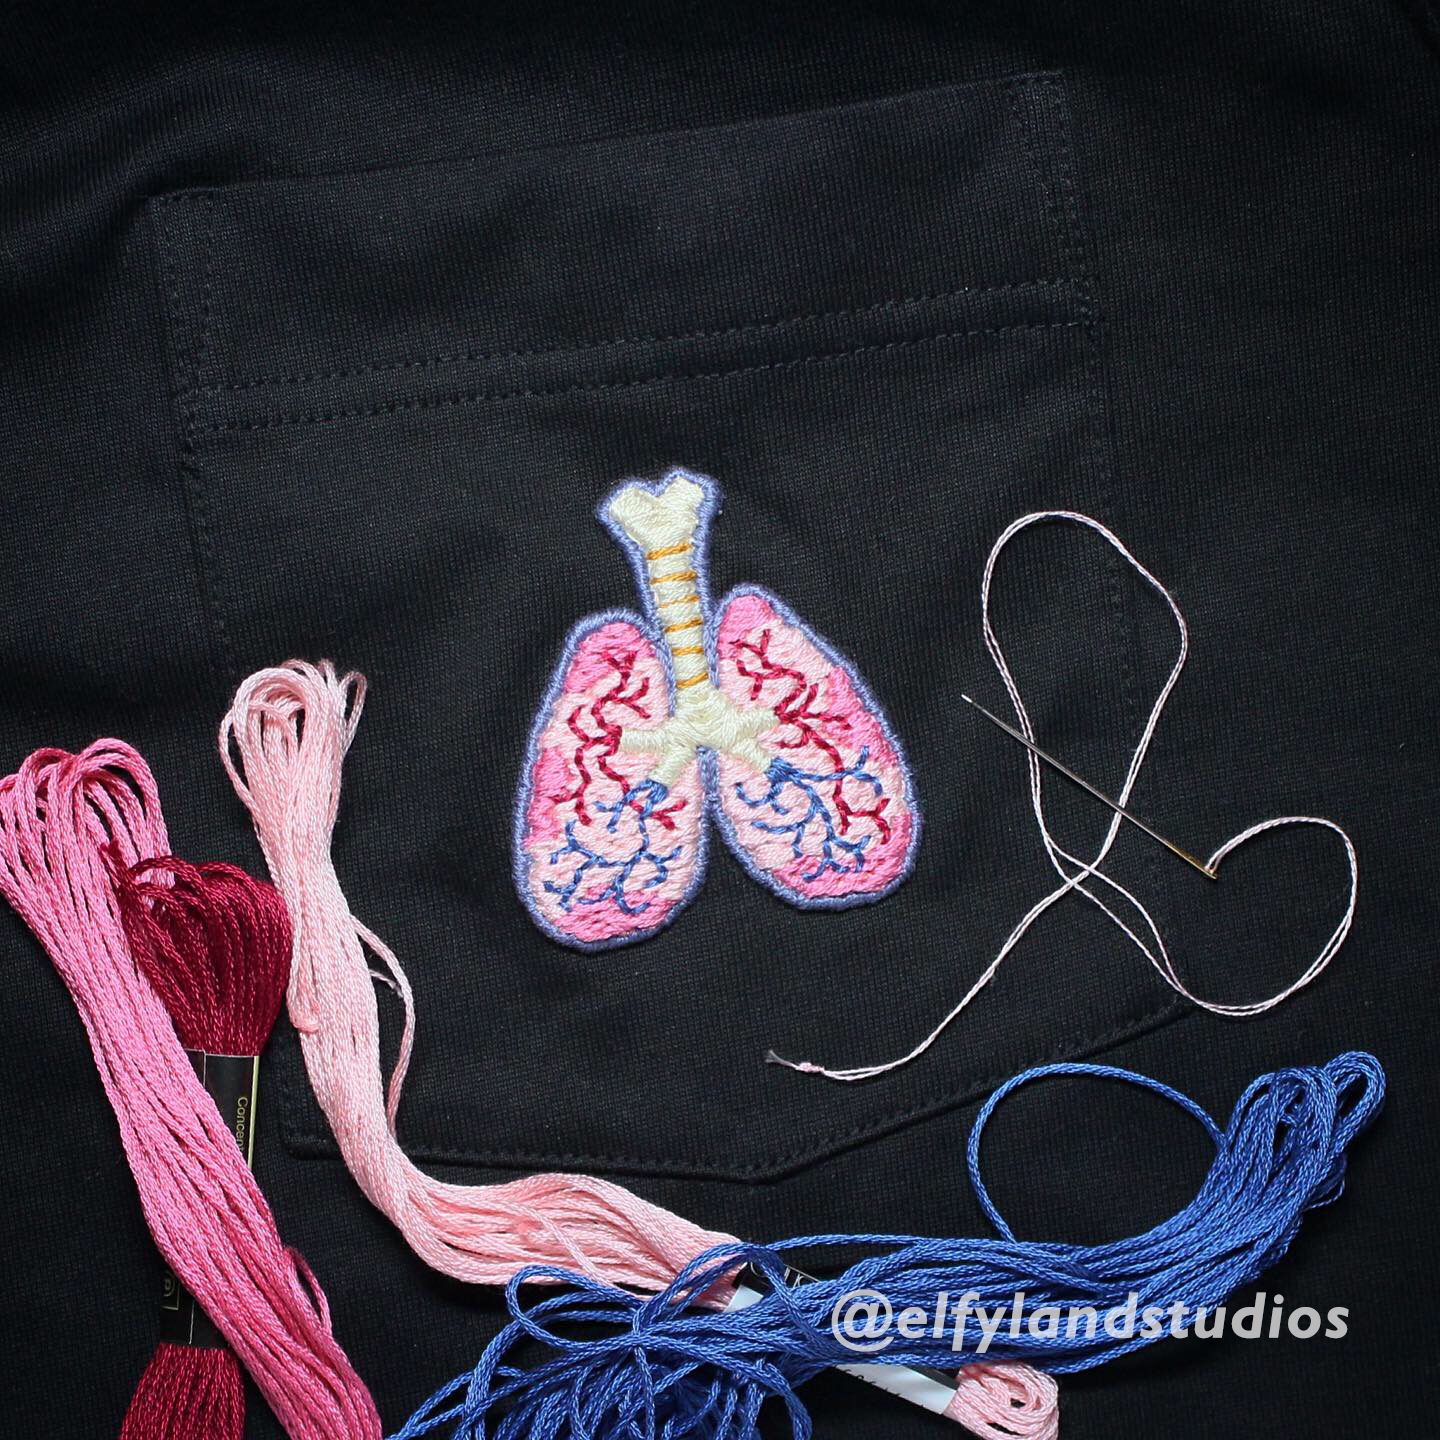 An embroidery of lungs